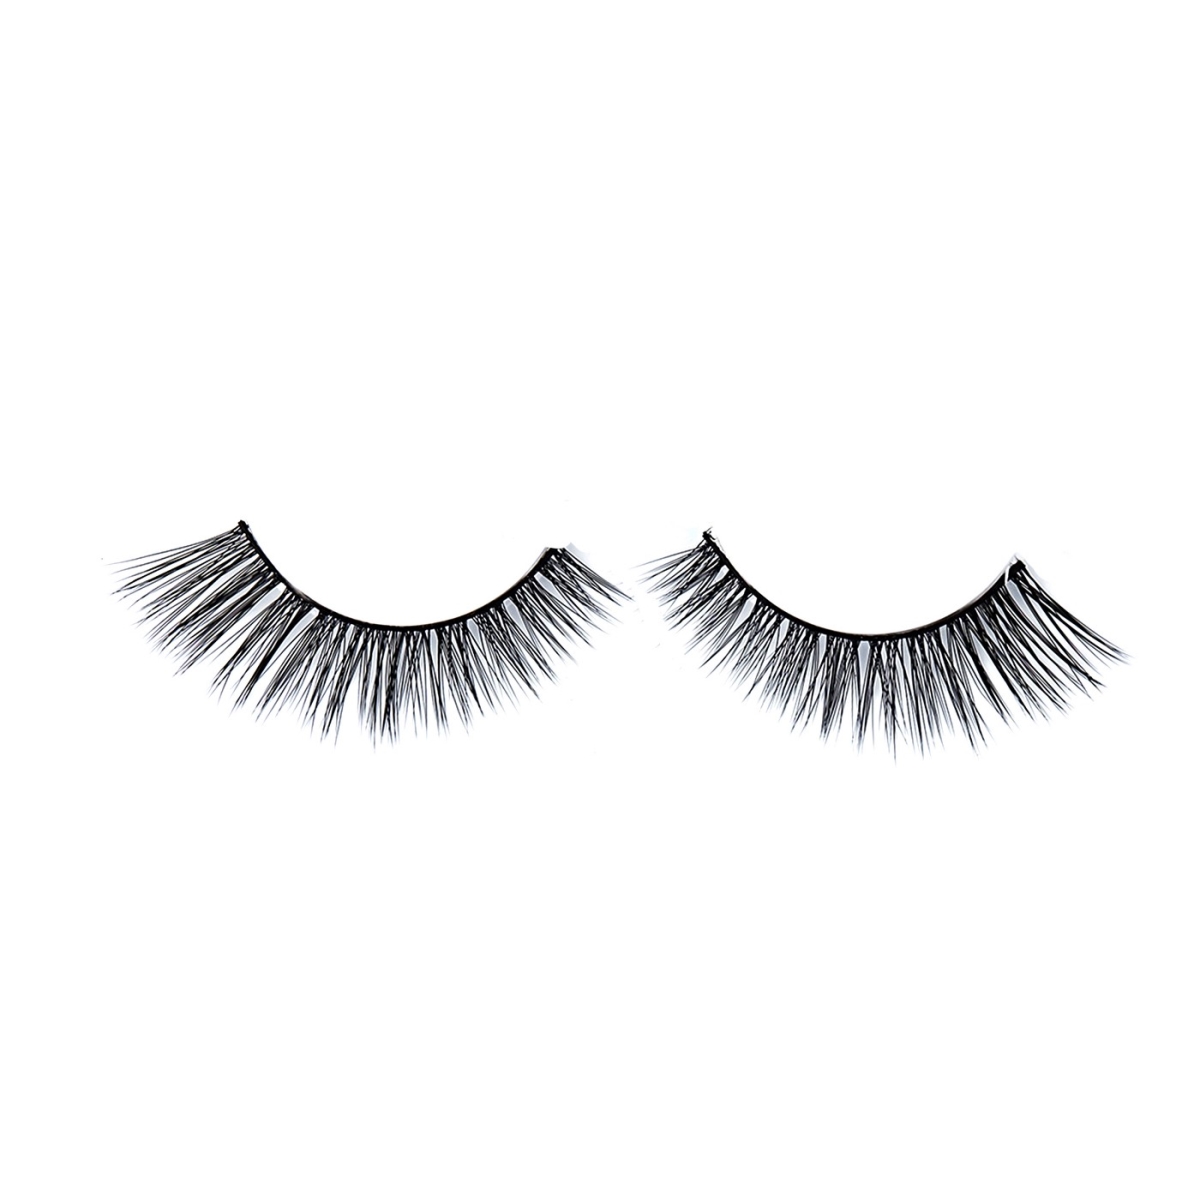 Winged & Polished Luxe Lash Kit, Black 85084 - Pack Of 4